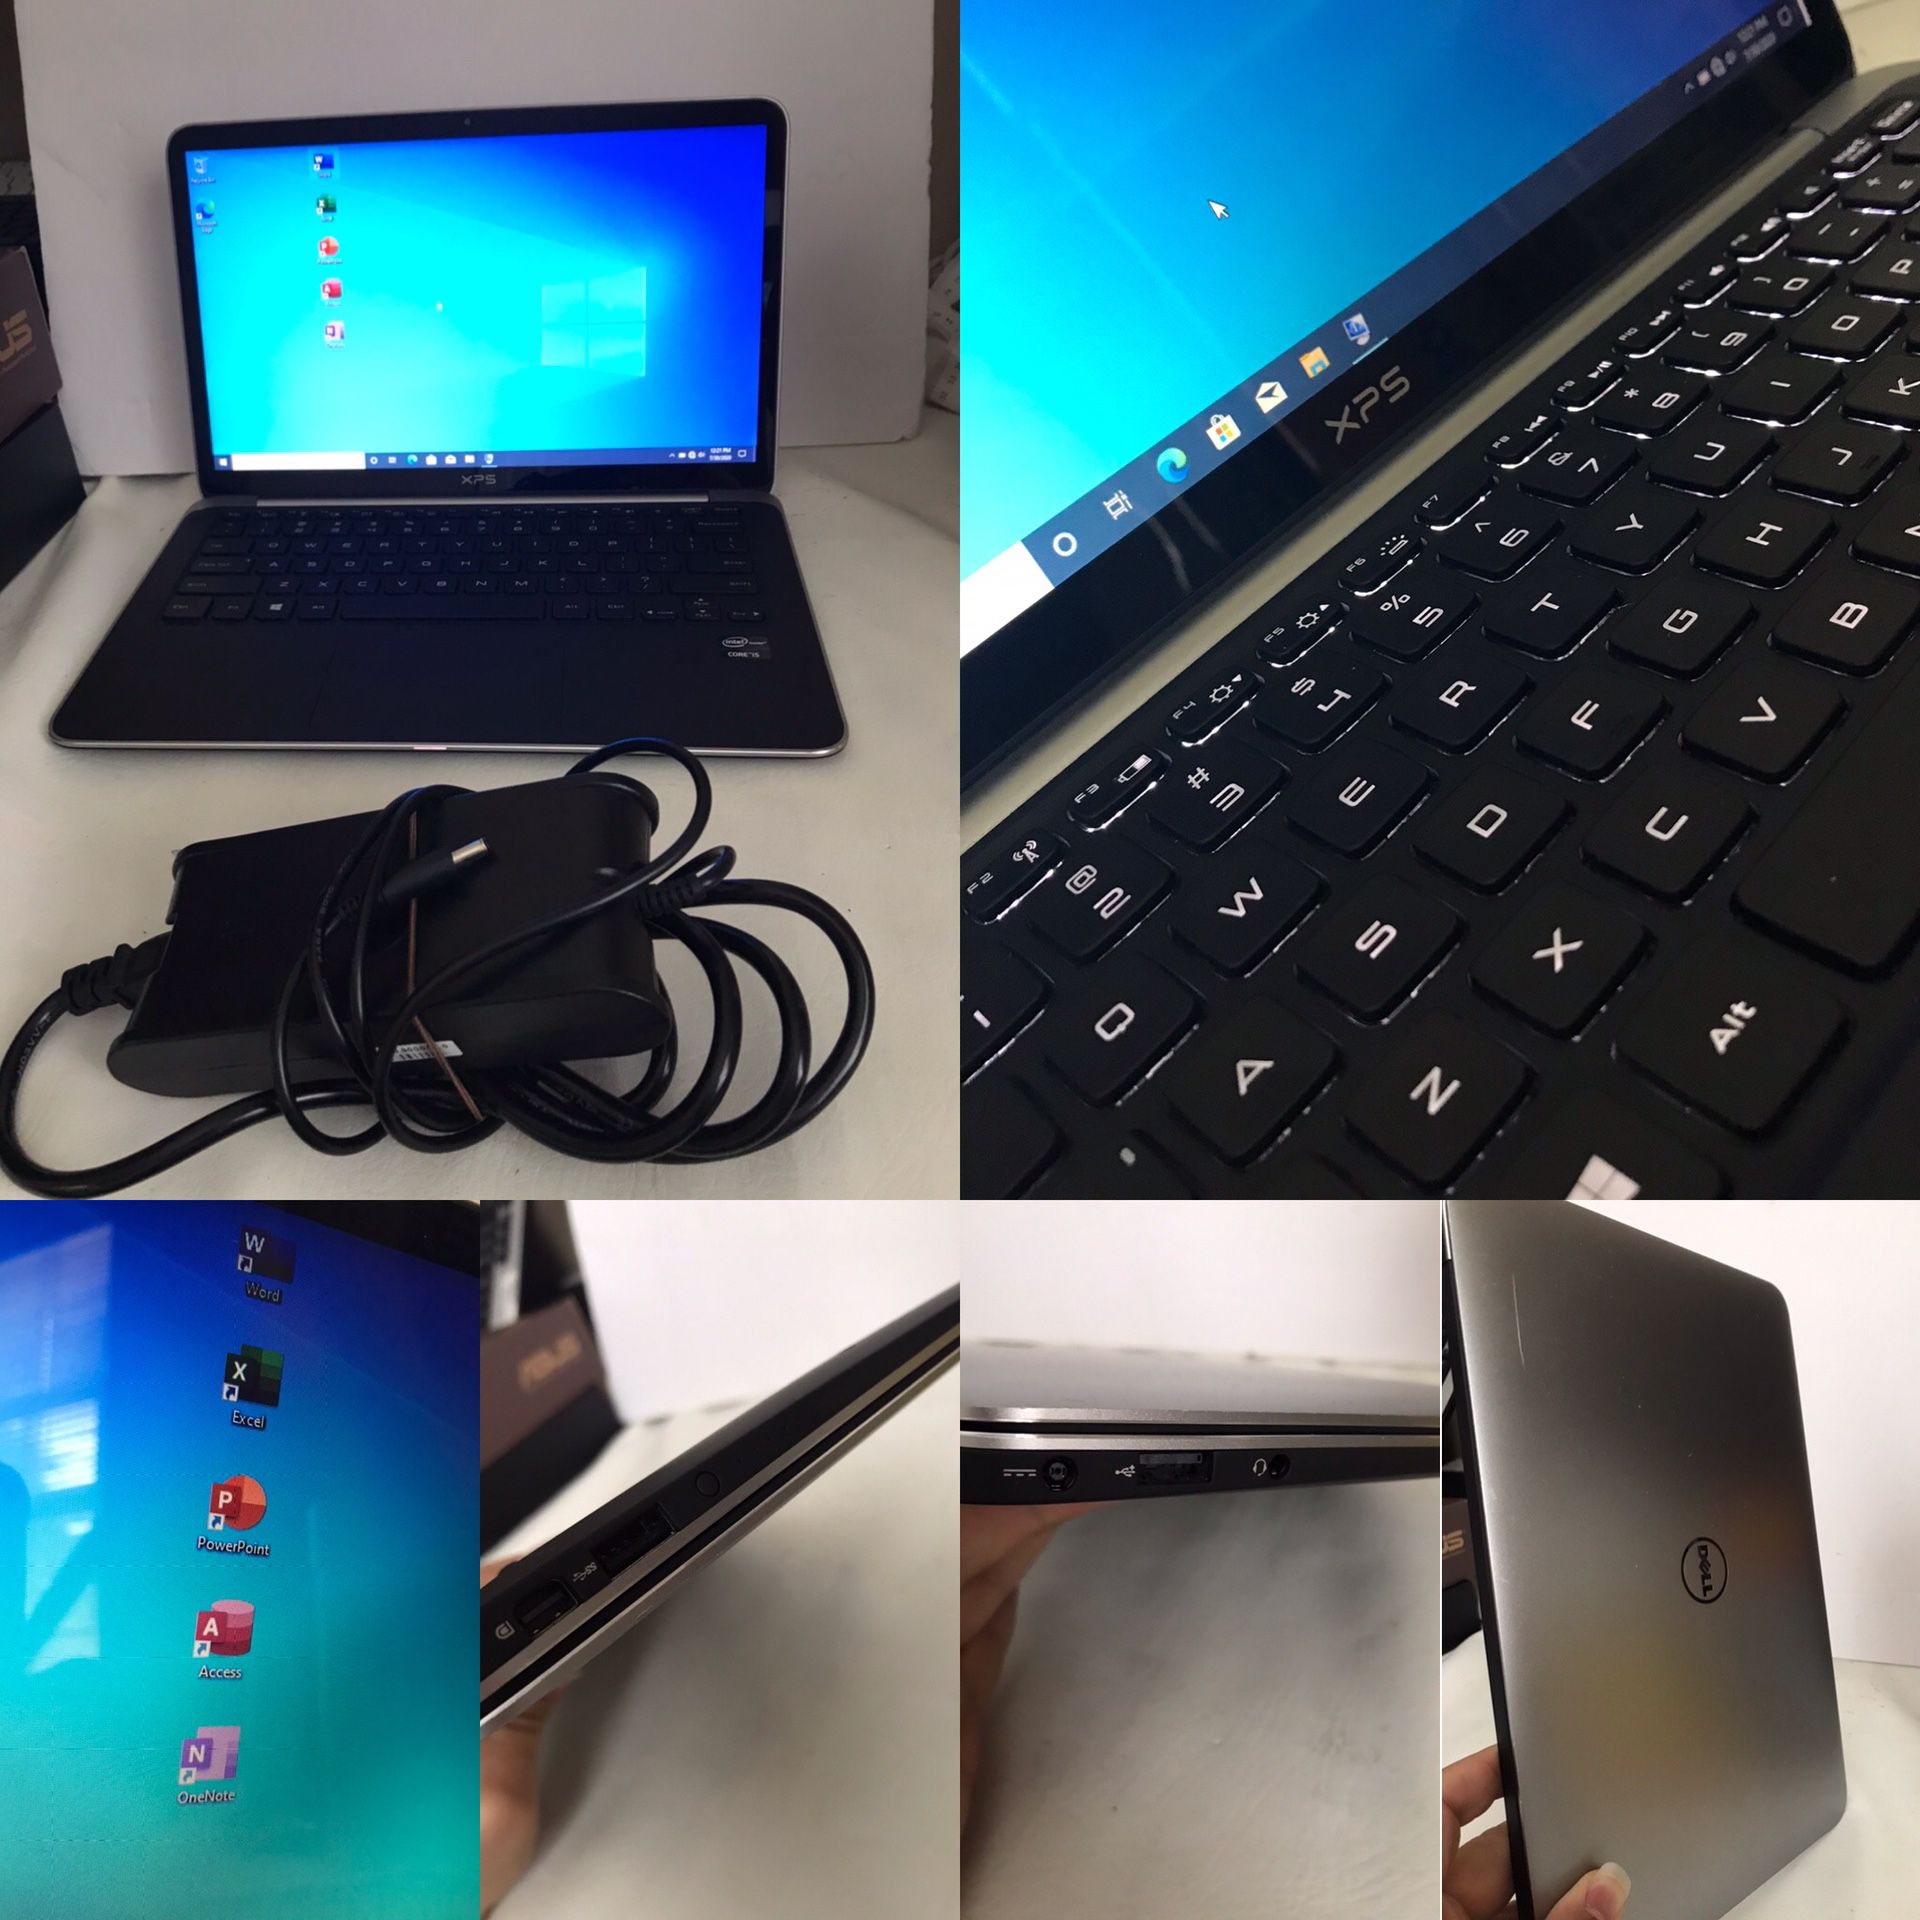 Ultra Thin i5 Dell XPS 13" Laptop 13.3” with 256Gb SSD and new Dell battery Dell XPS 13 i5 4Gb 256Gb SSD 2x USB ports and miniDisplayPort. HD scre